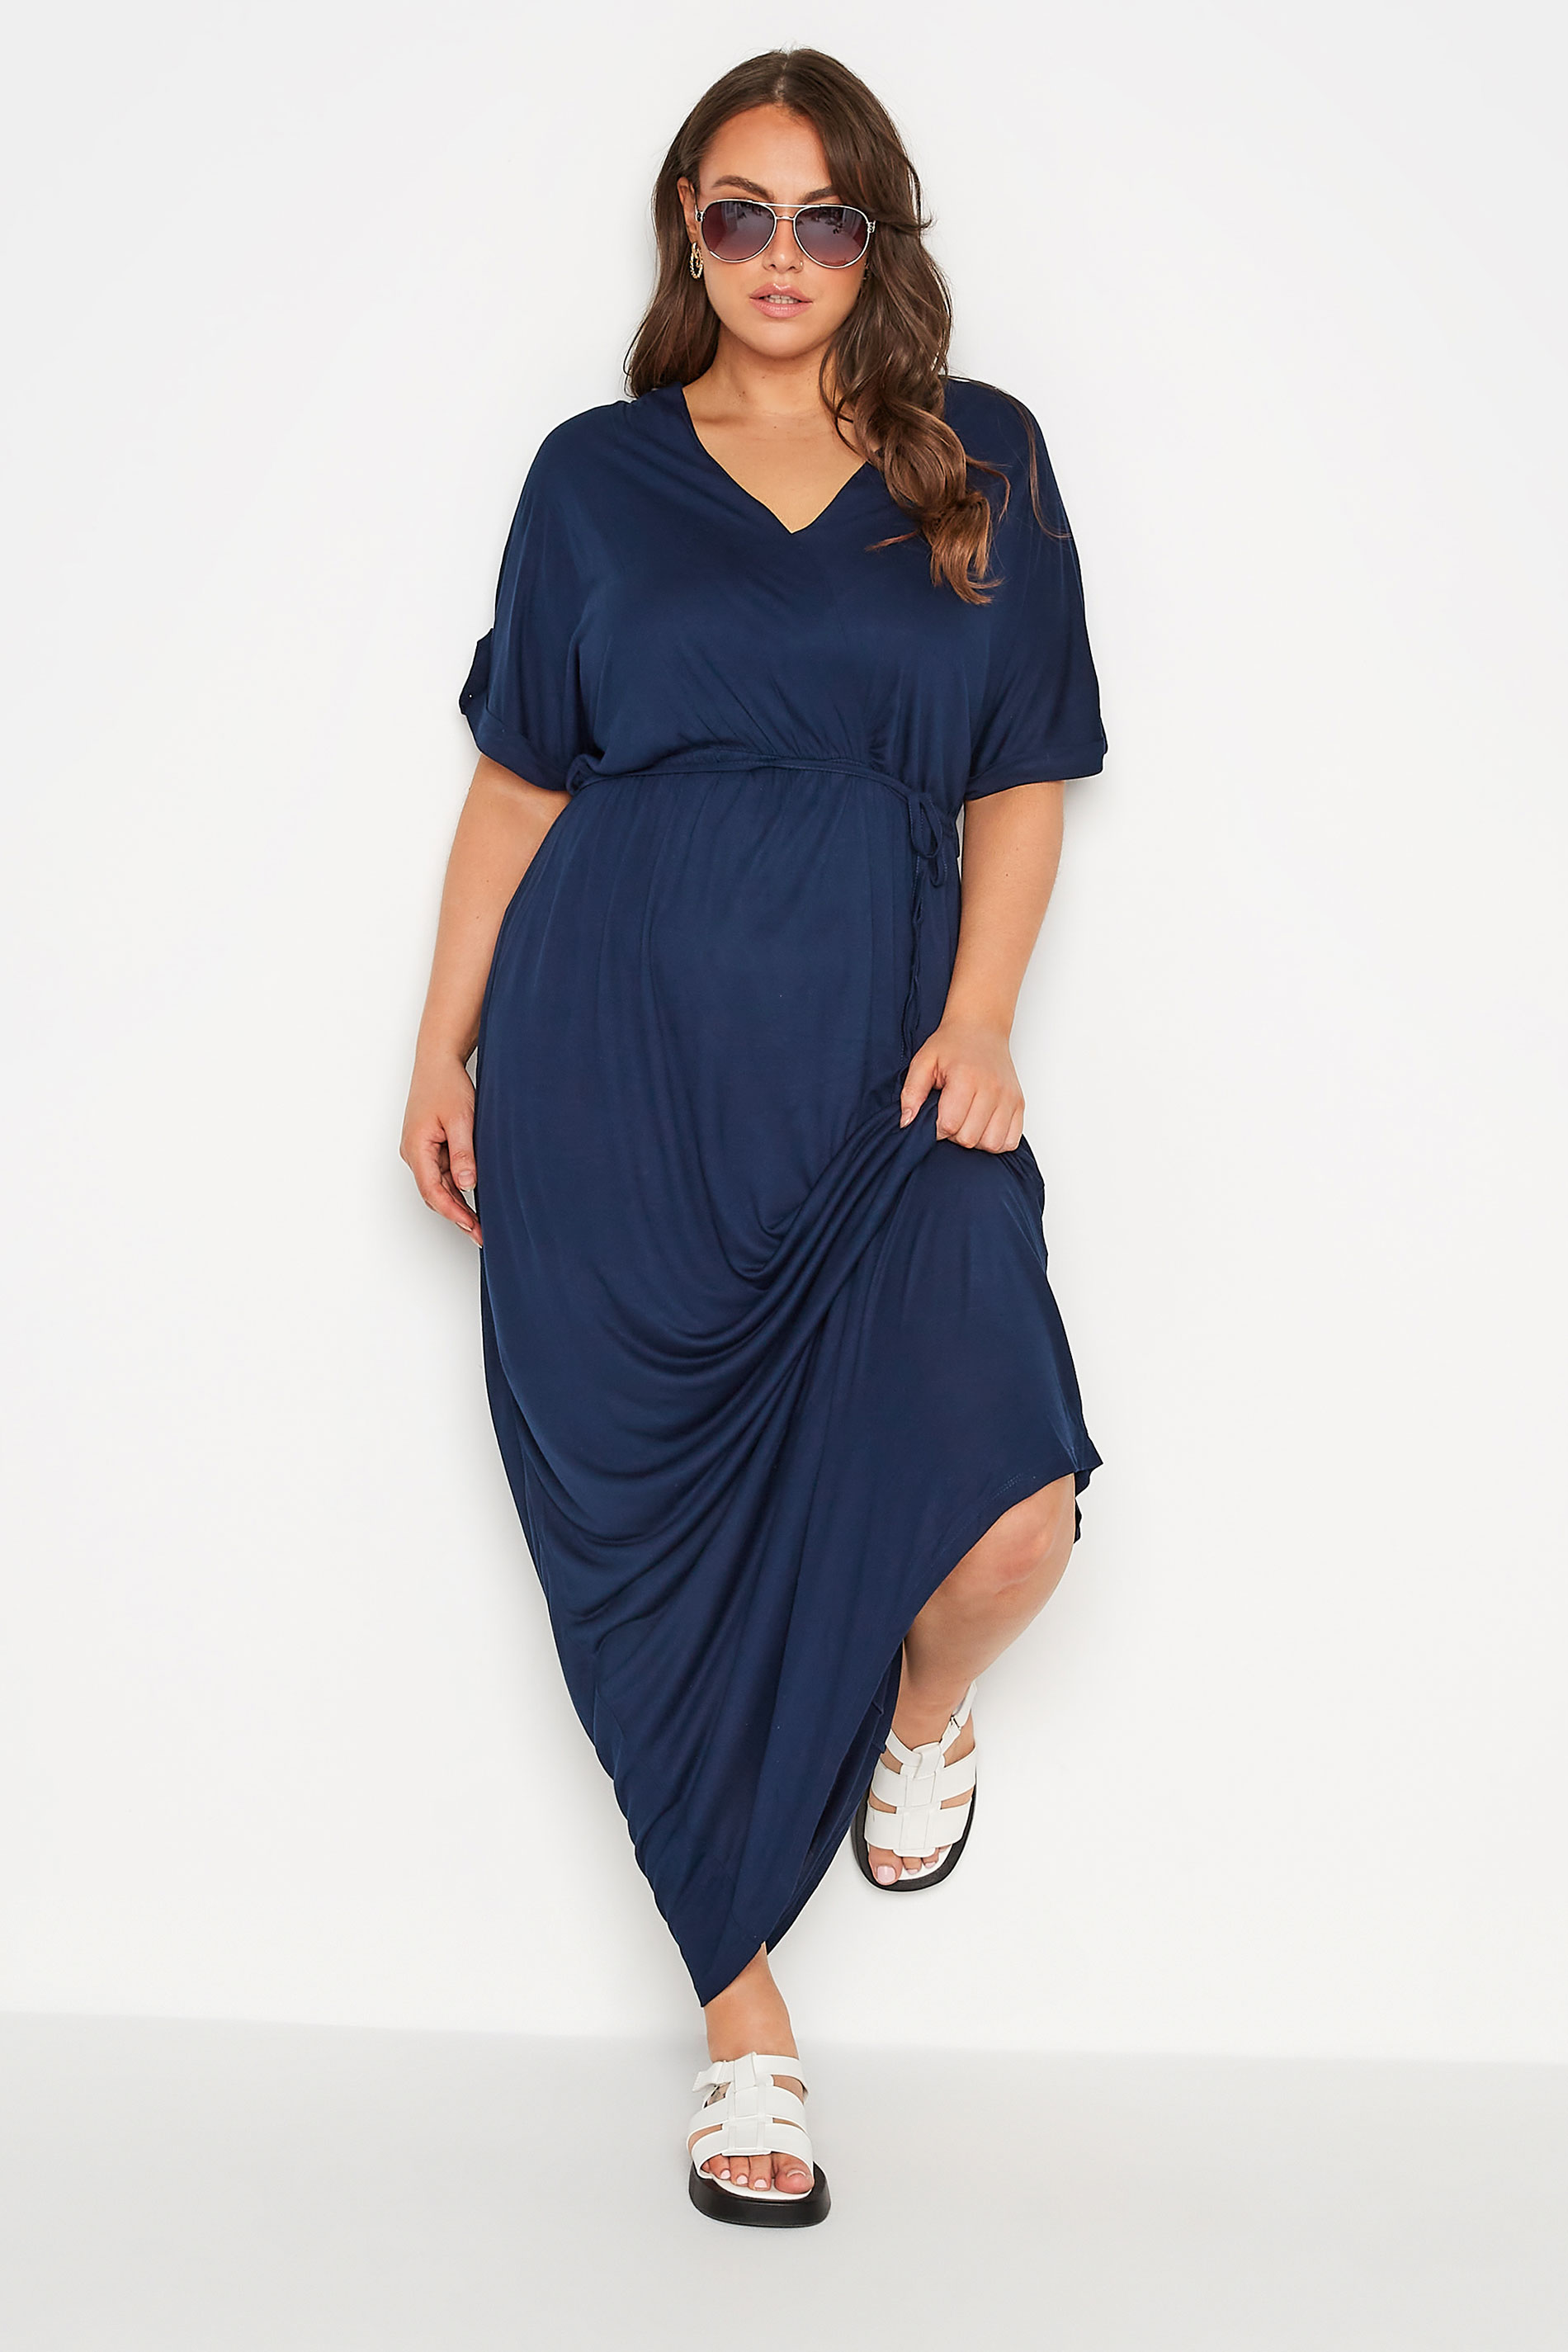 Robes Grande Taille Grande taille  Robes Longues | Robe Bleue Marine Maxi Manches Courtes en Jersey - TC79997